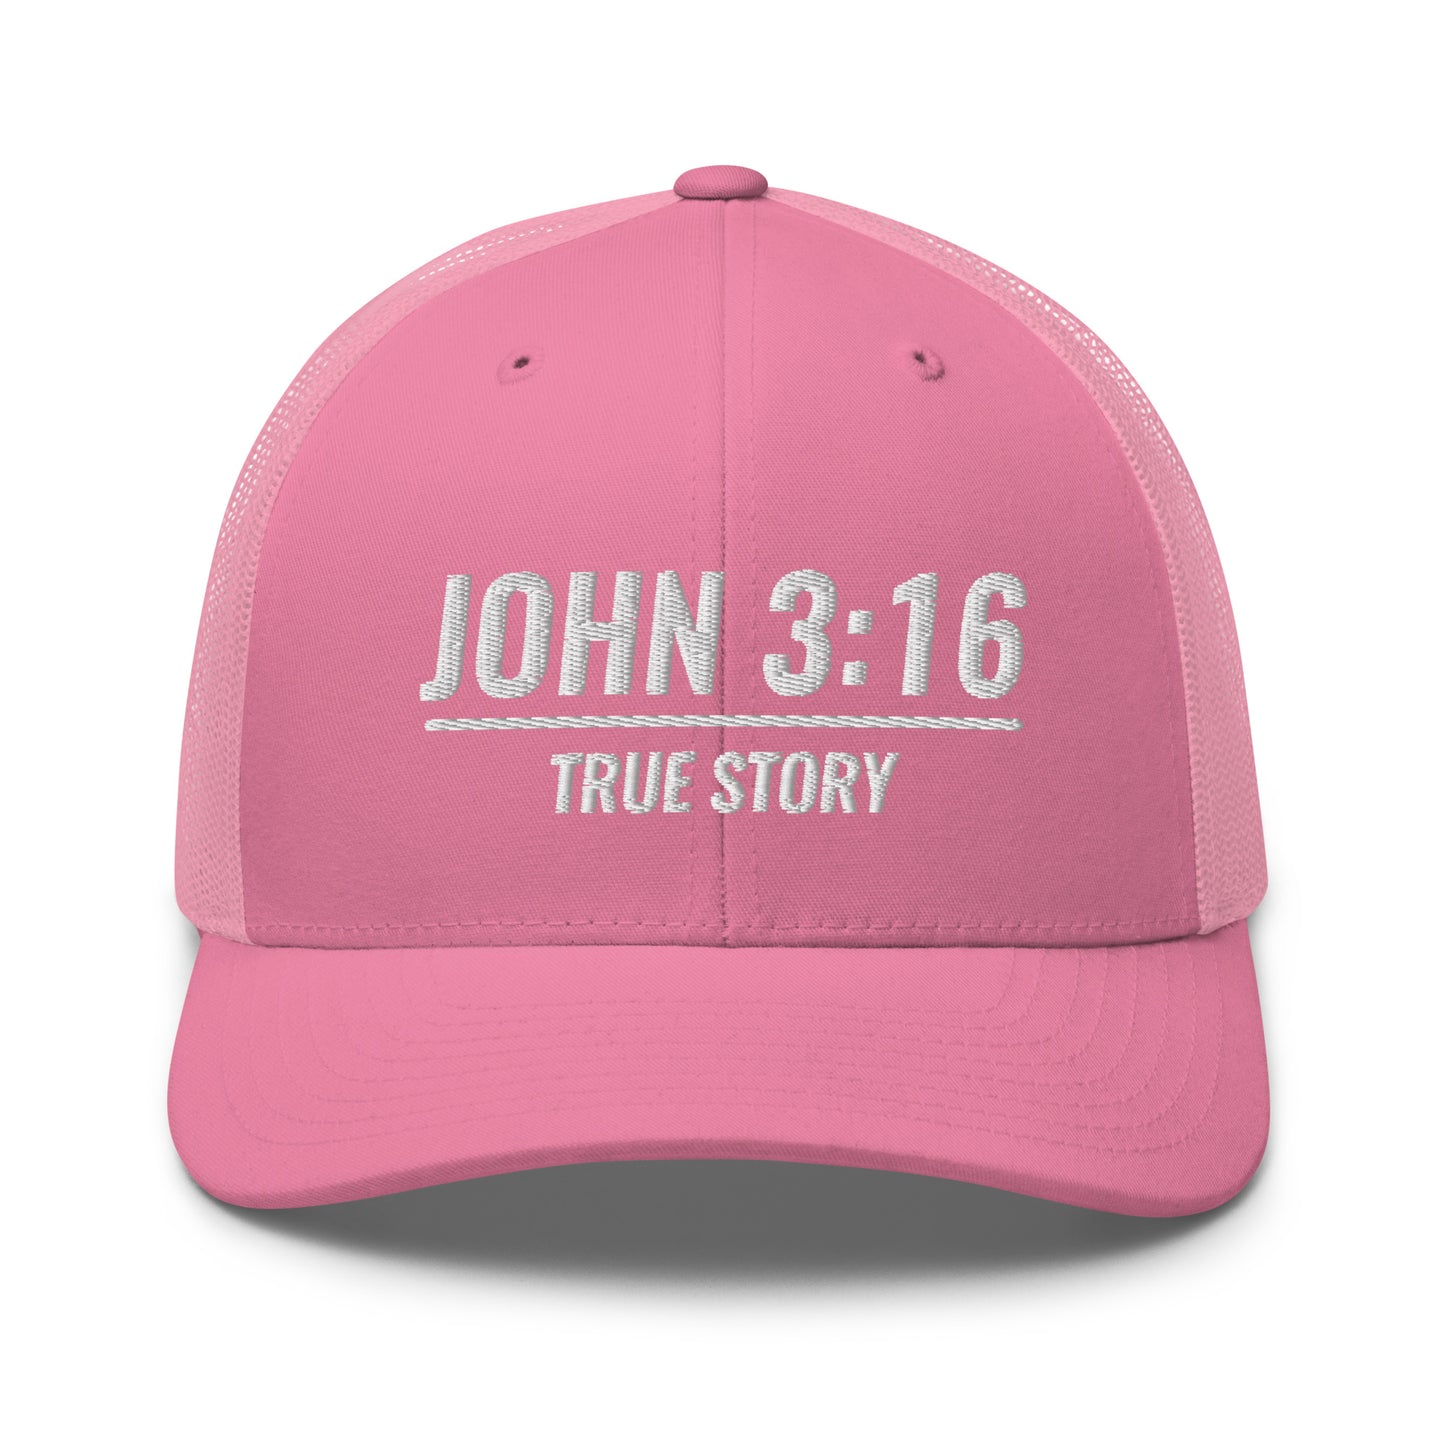 John 3:16 True Story Hat.  A pink Yupoong 6606 hat with John 3:16 True Story embroidered on front of hat.